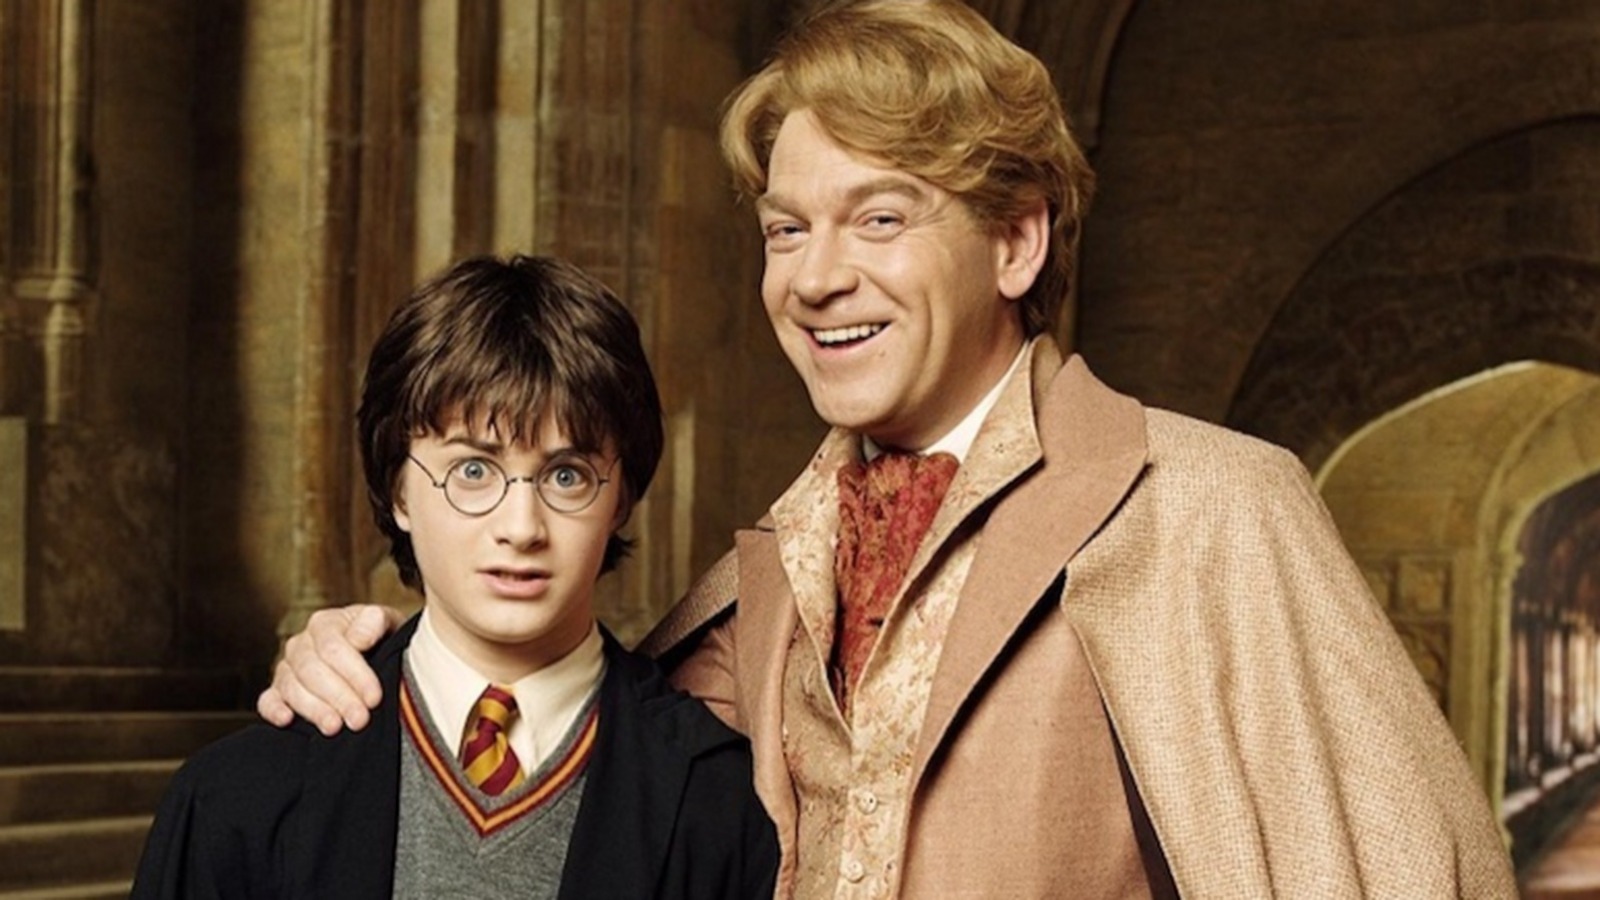 Who portrayed Gilderoy Lockhart in the Harry Potter films? 2